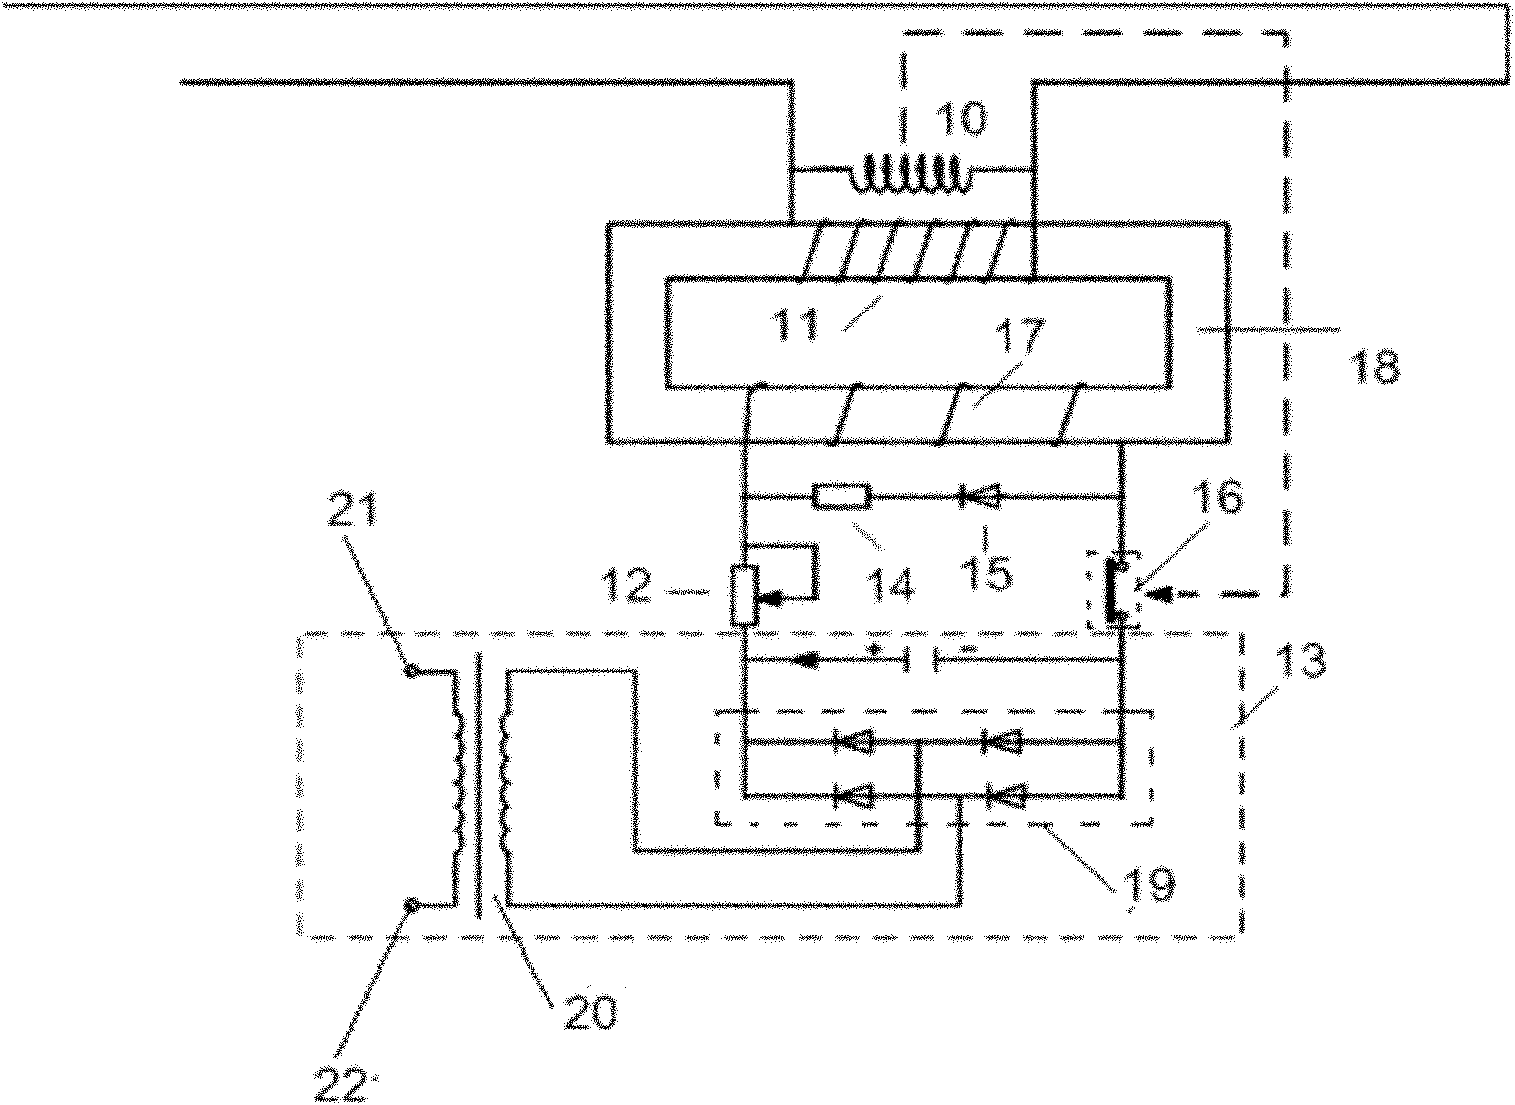 Impedance composite superconducting fault current limiter based on novel superconducting material